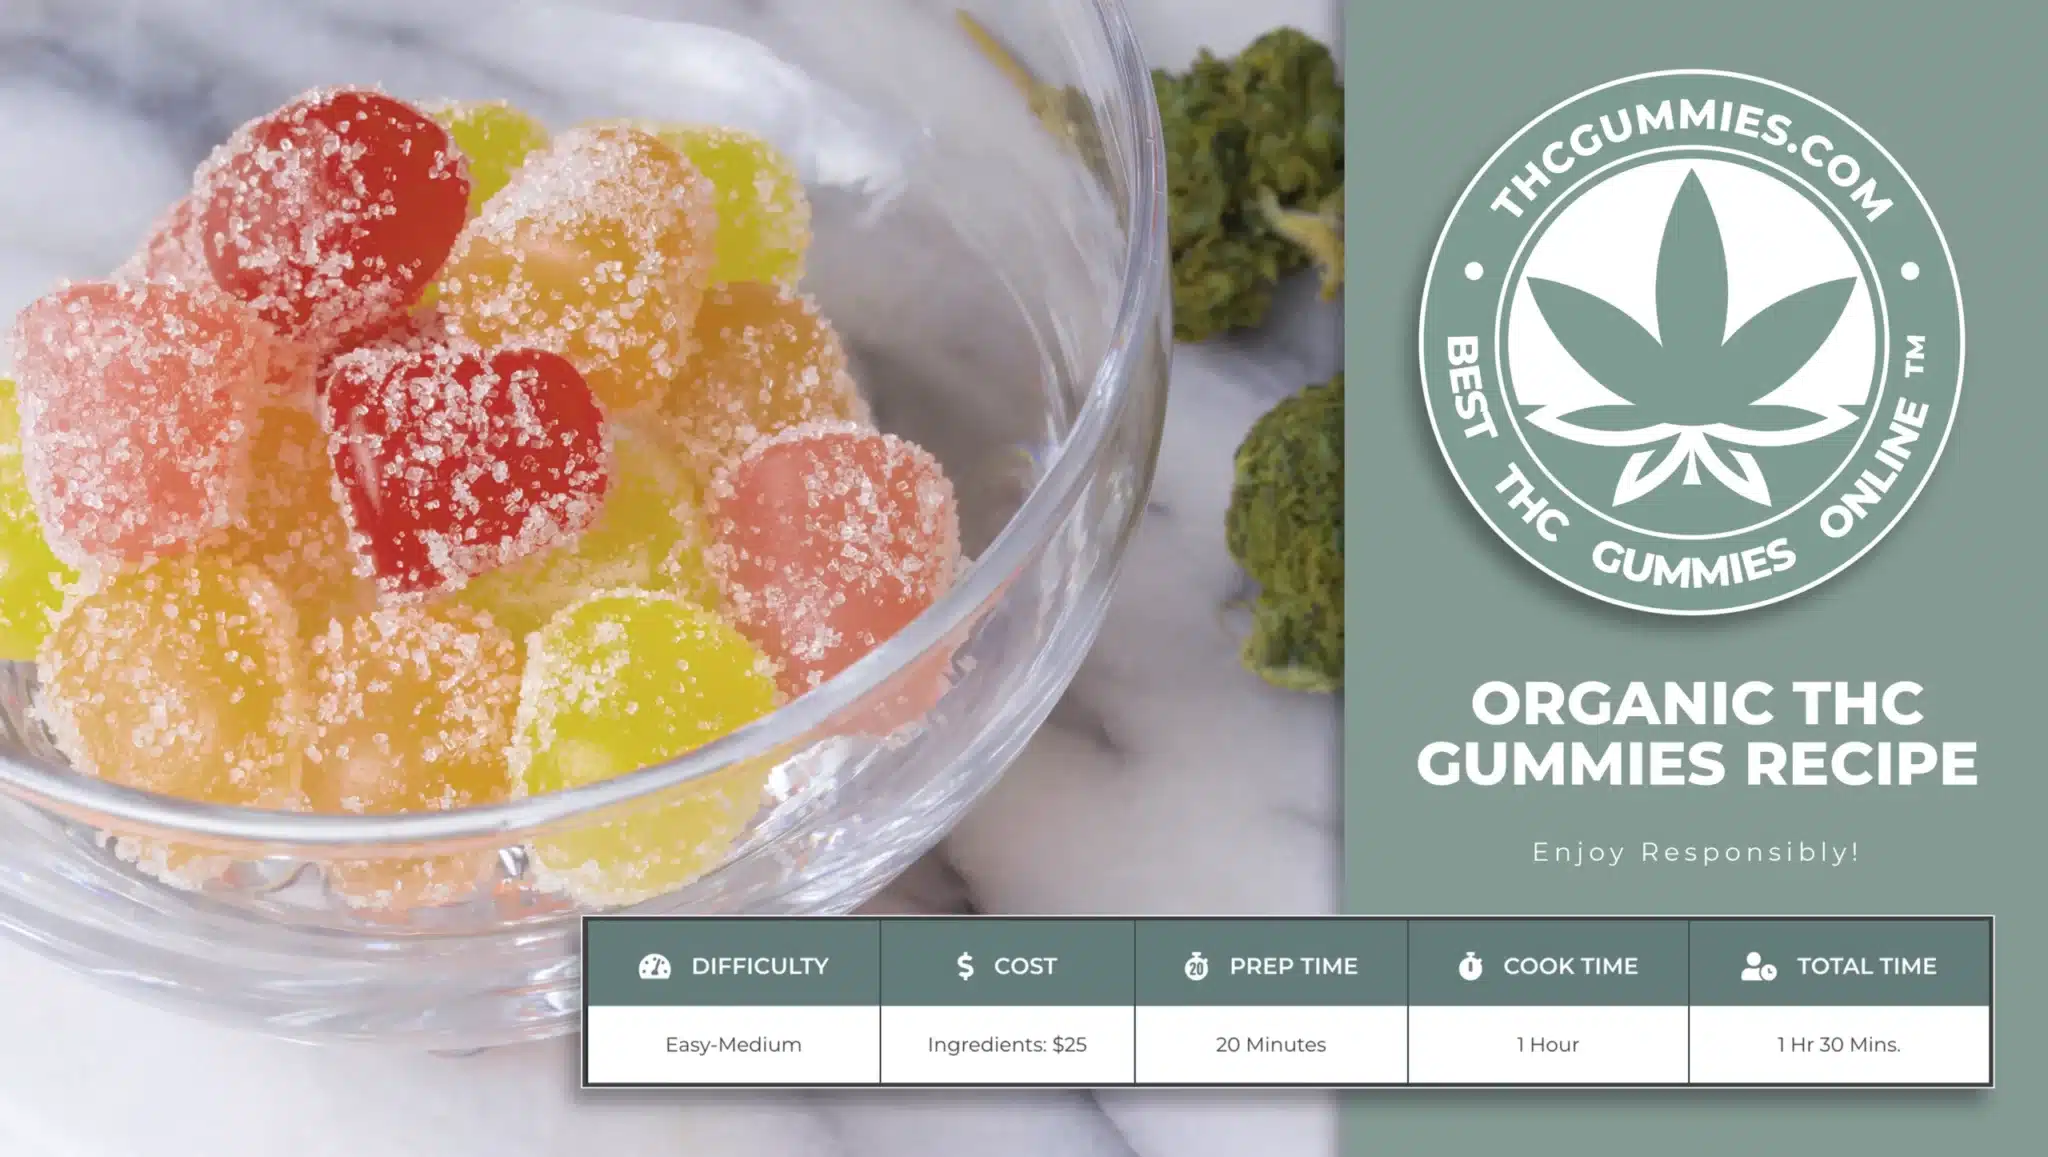 Organic recipe for thc gummies with chart of recipe features scaled